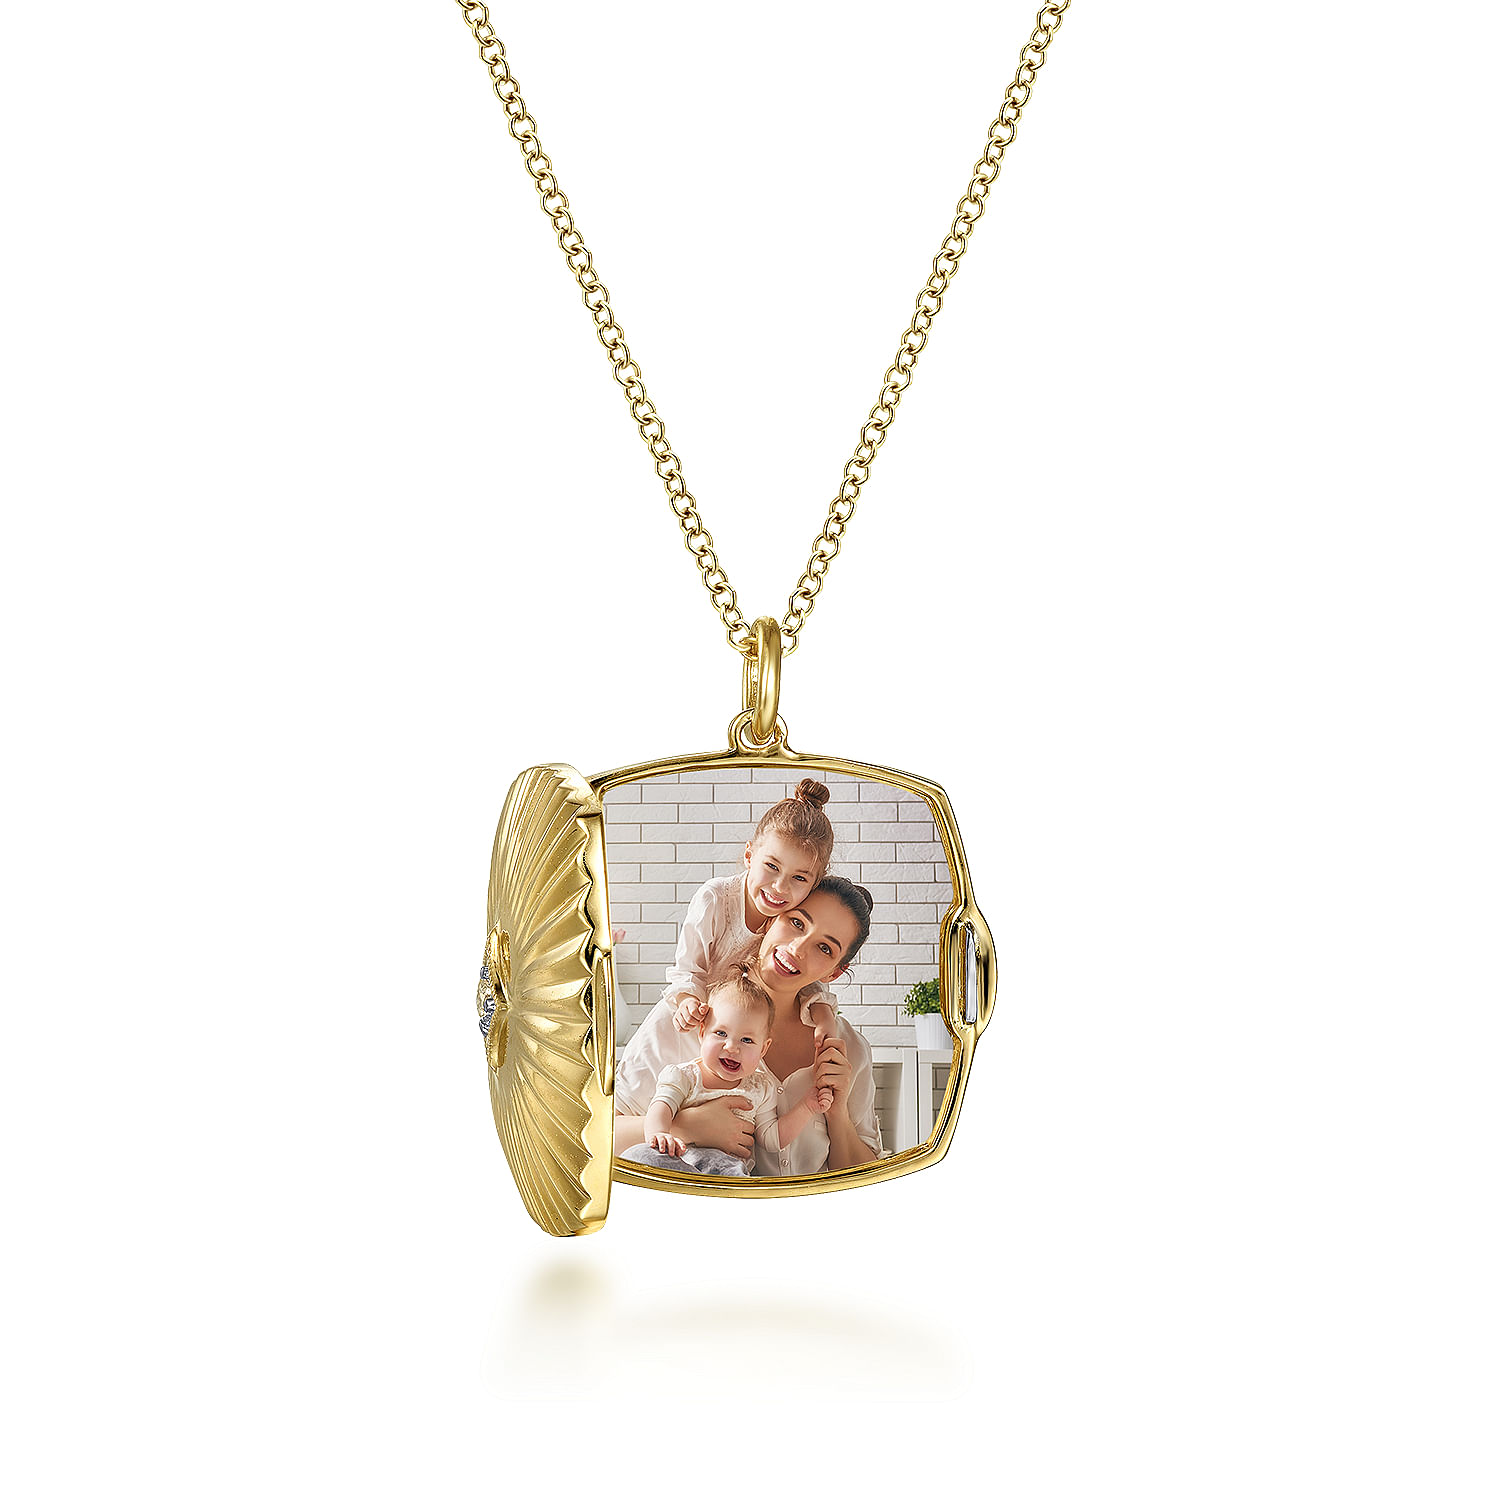 14K Yellow Gold Textured Locket Necklace with Diamond Center